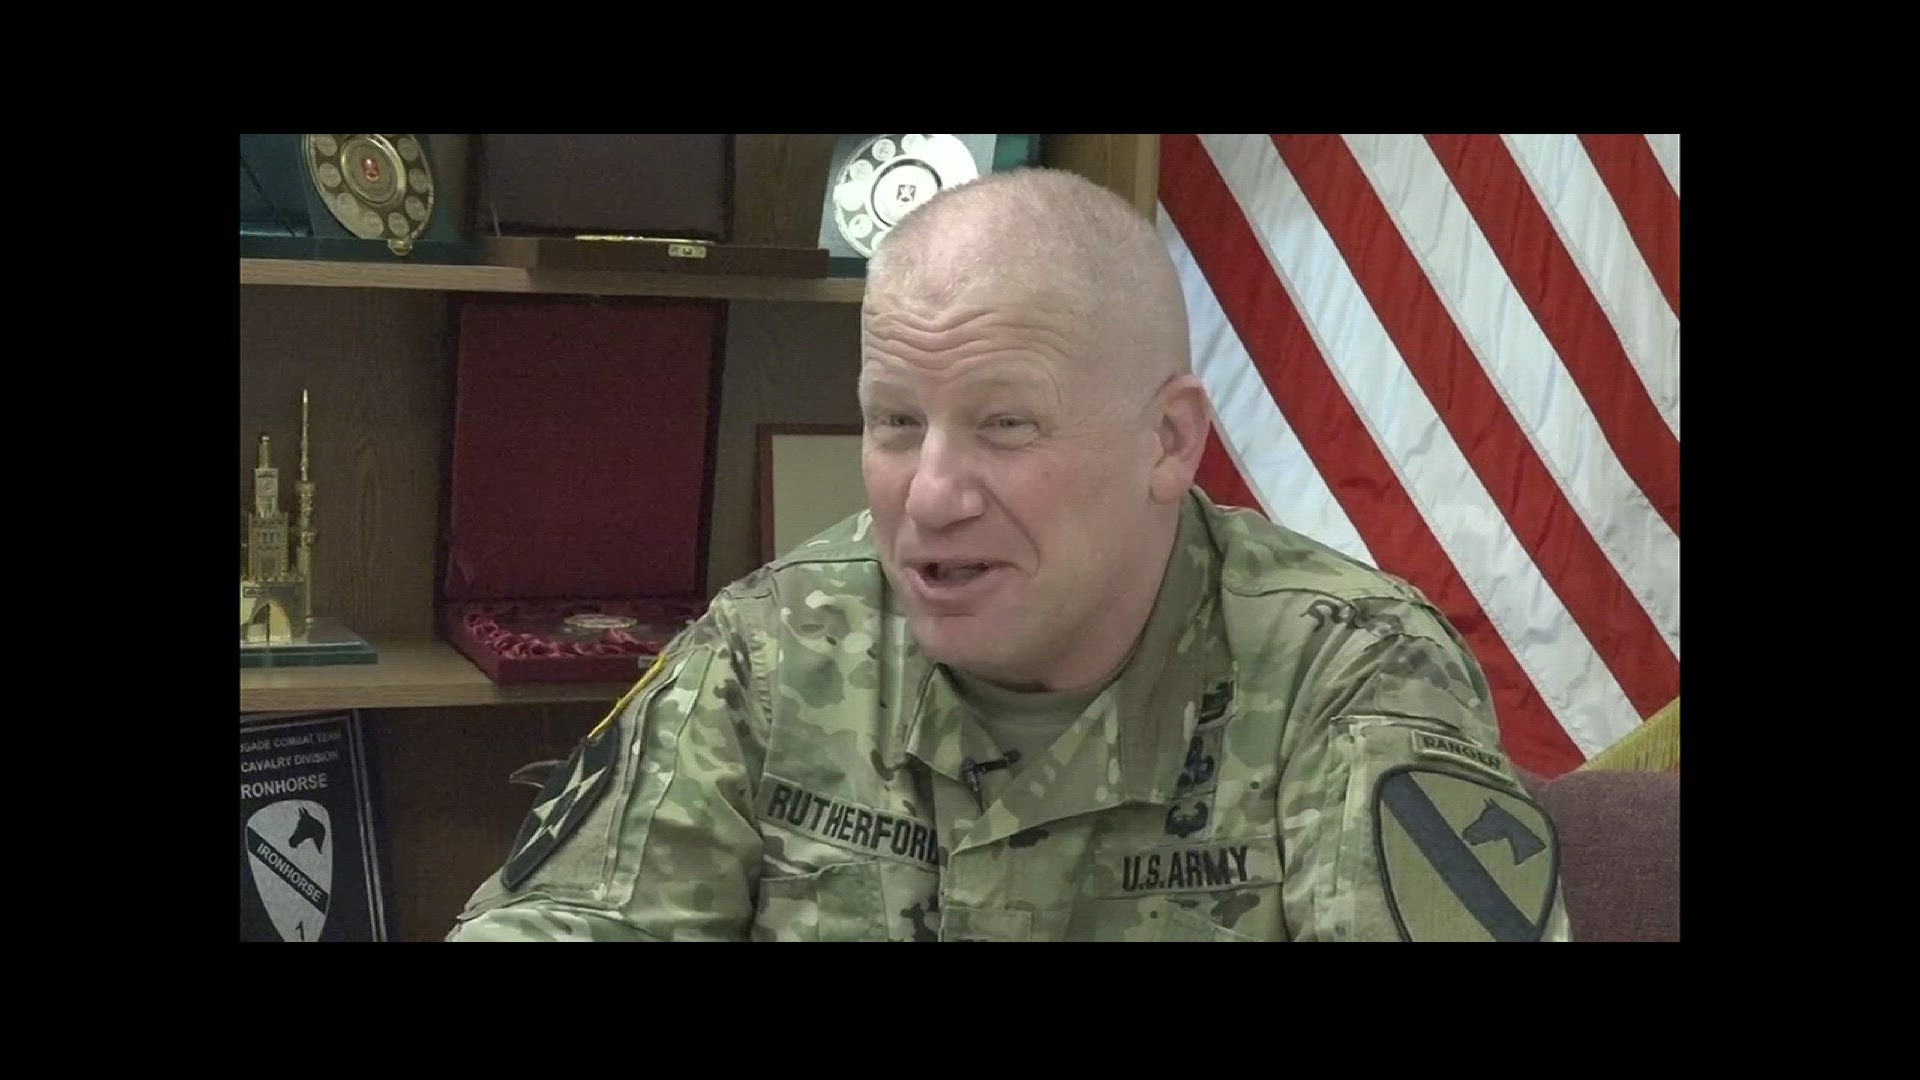 1ABCT Colonel Trey Rutherford discusses recent training and plans for a Europe deployment this year.